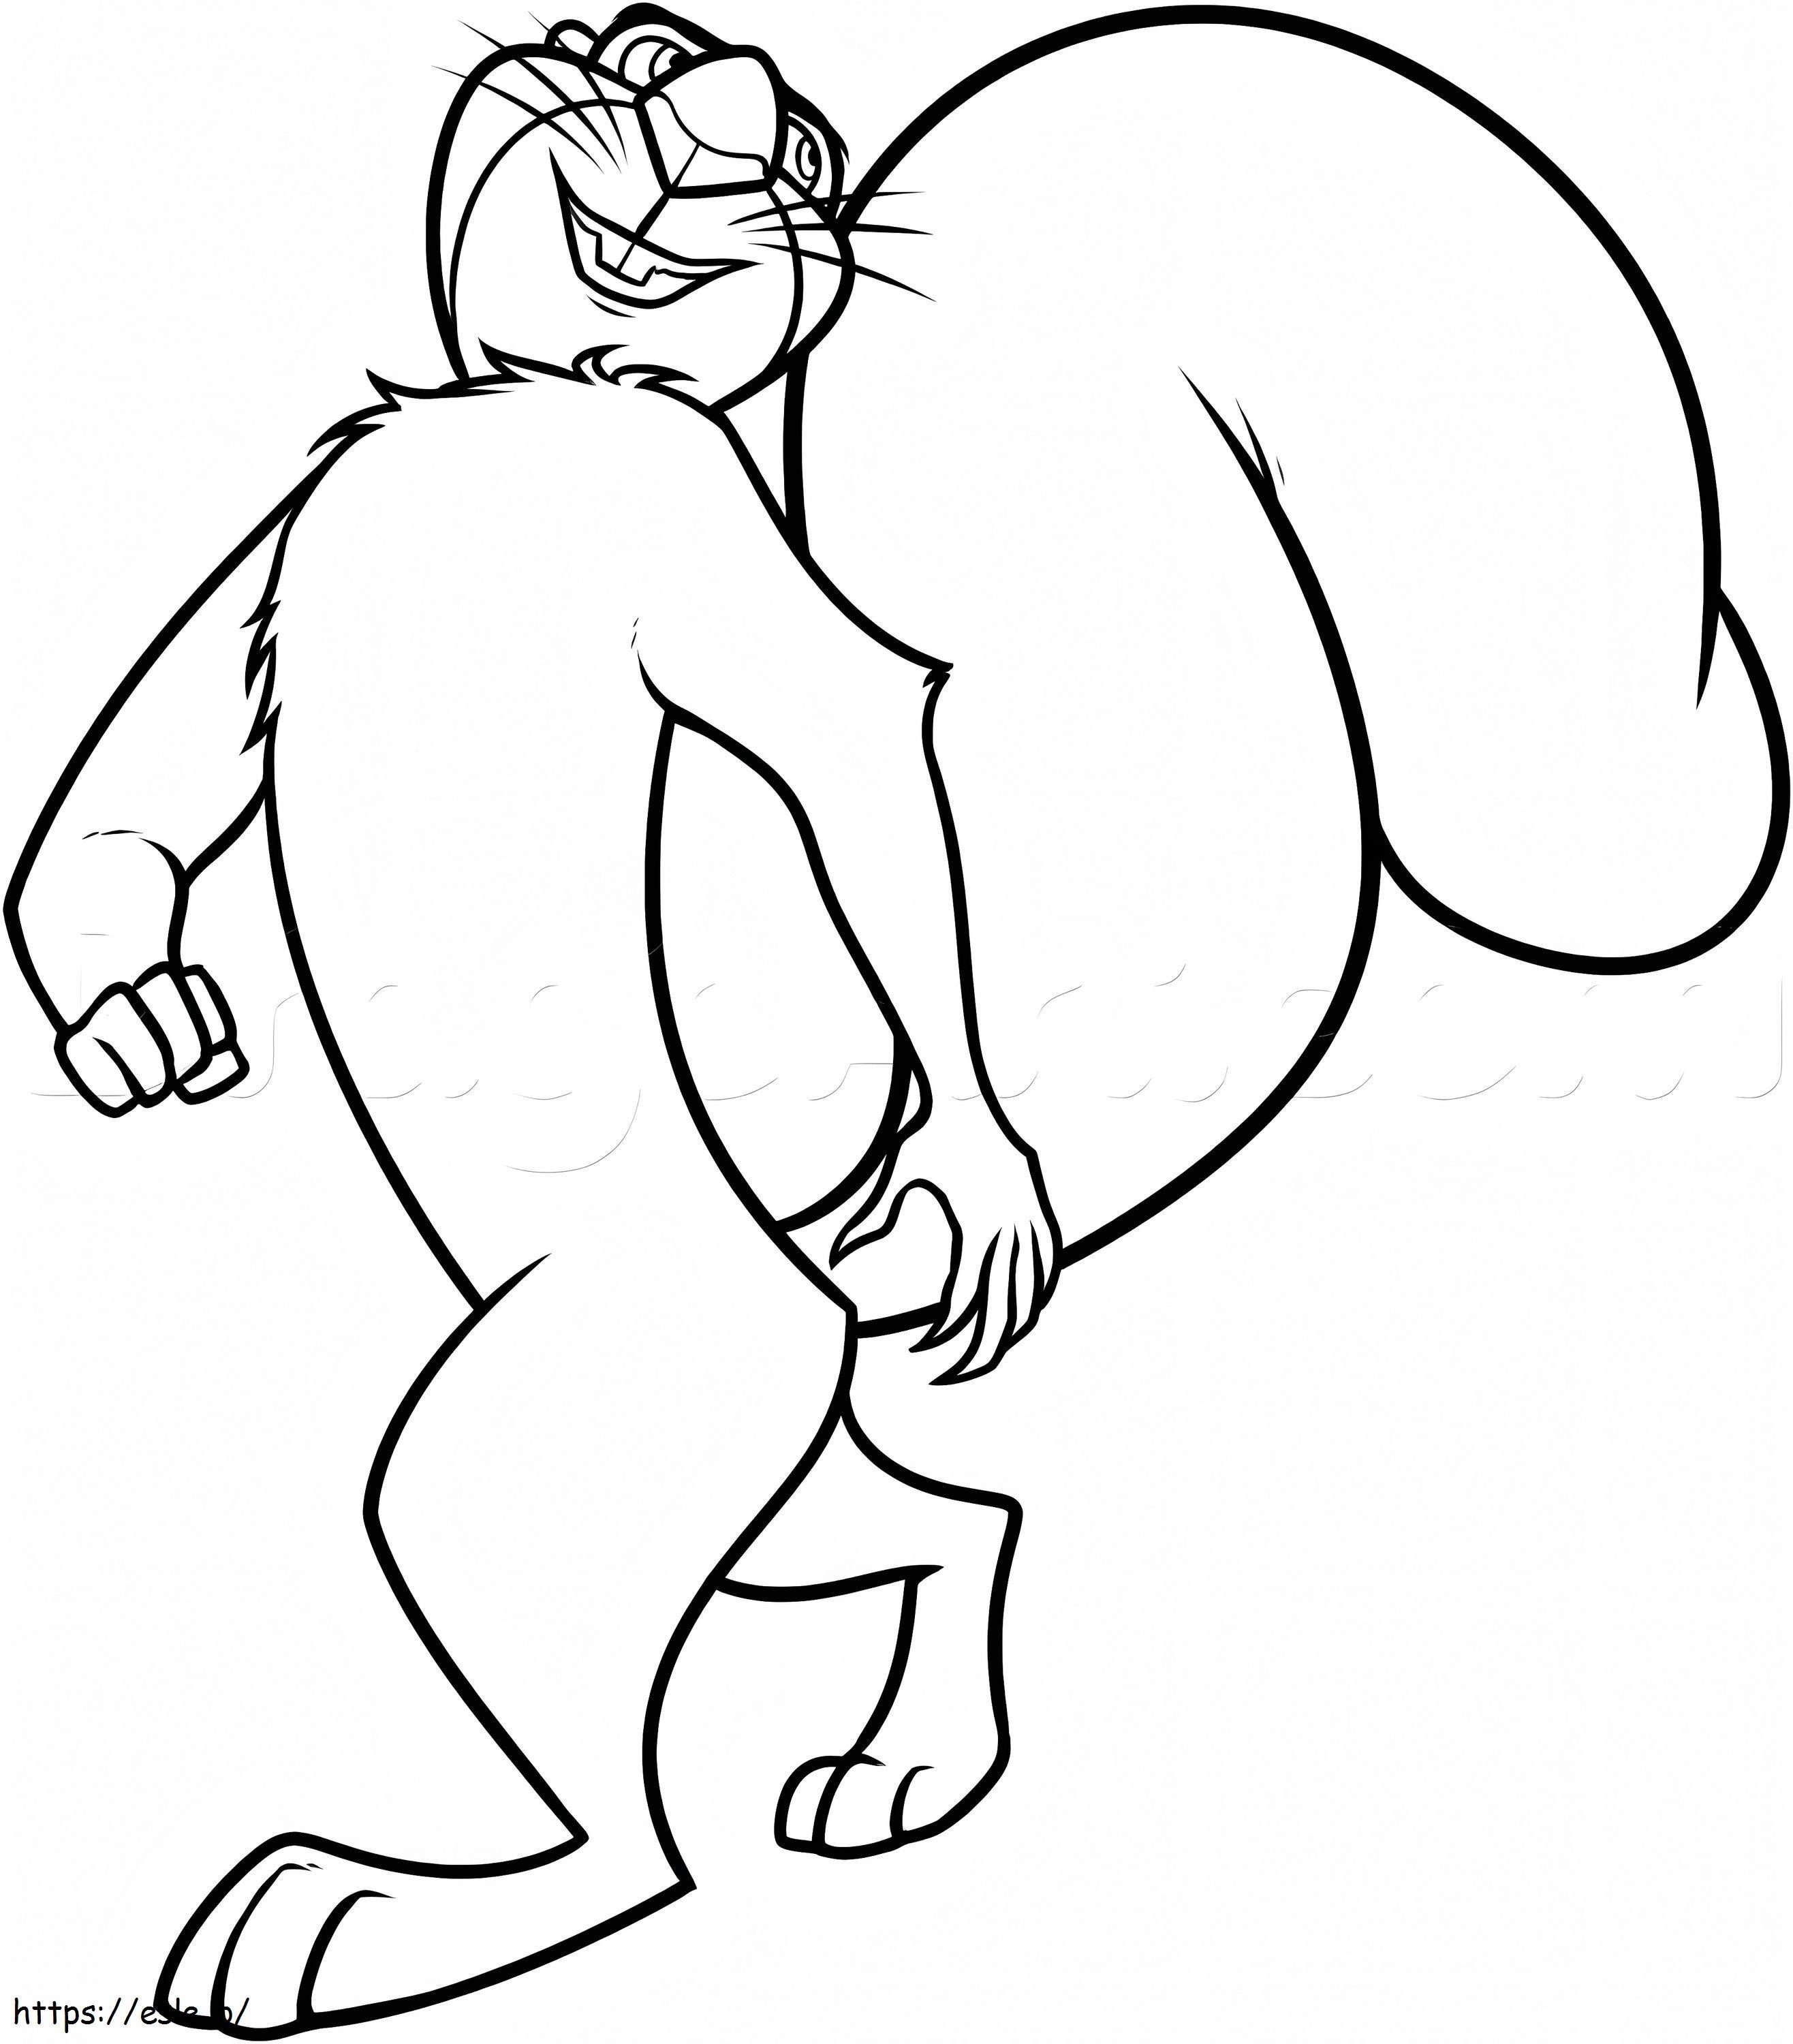 Grayson From The Nut Job coloring page